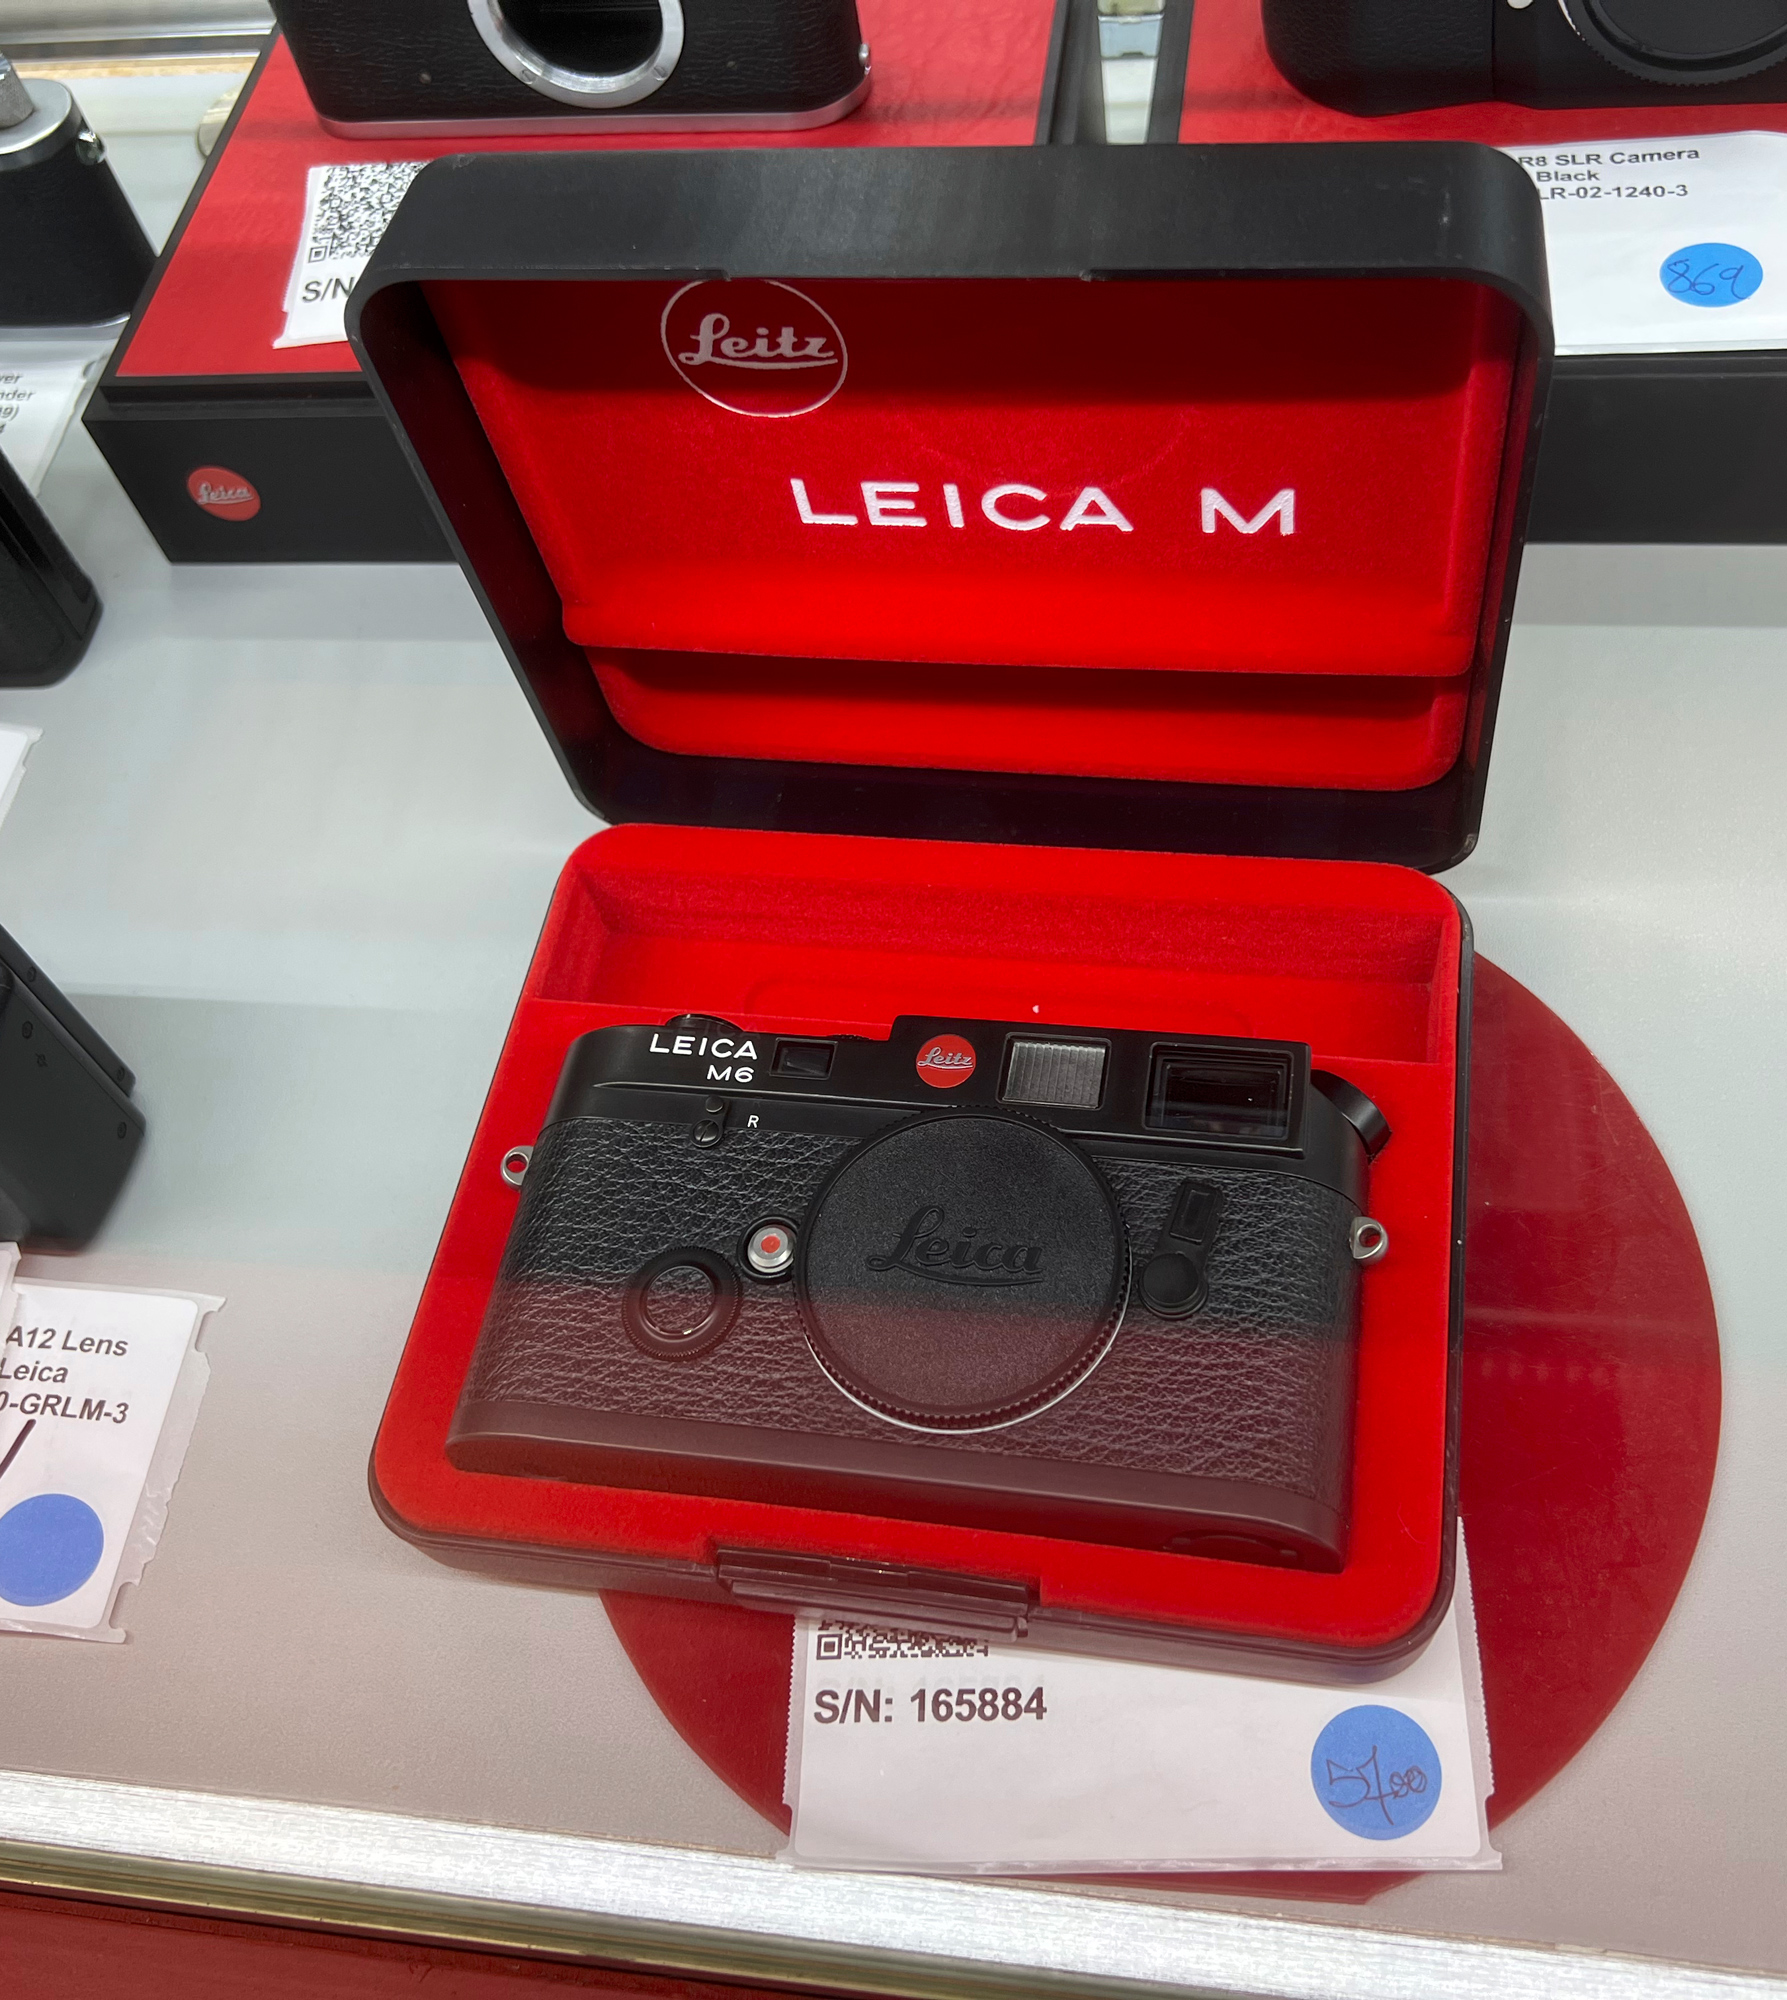 I owned this camera back in the day. It's a beauty and they have lots of Leica lenses too